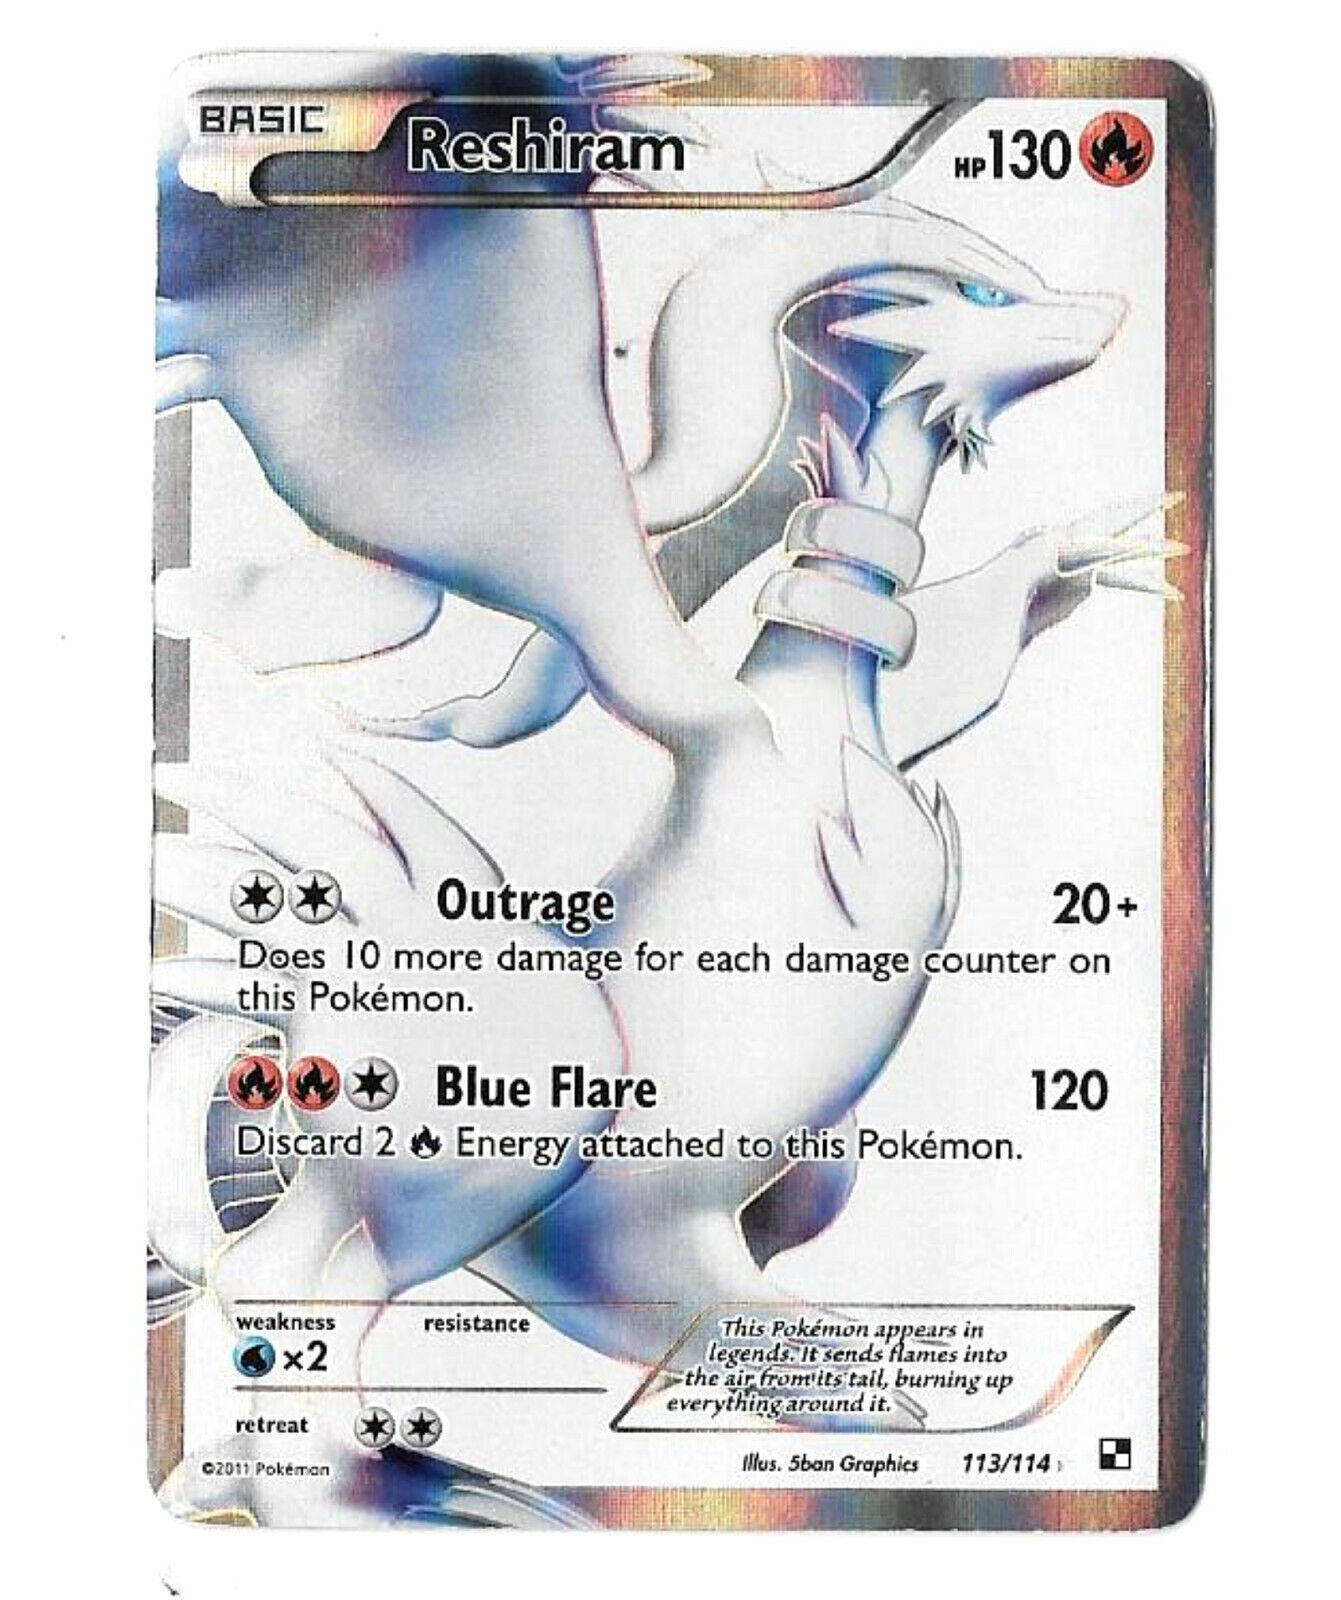 POKEMON CARD RESHIRAM 113/114 Holo, Excellent Condition in Protective Cover.